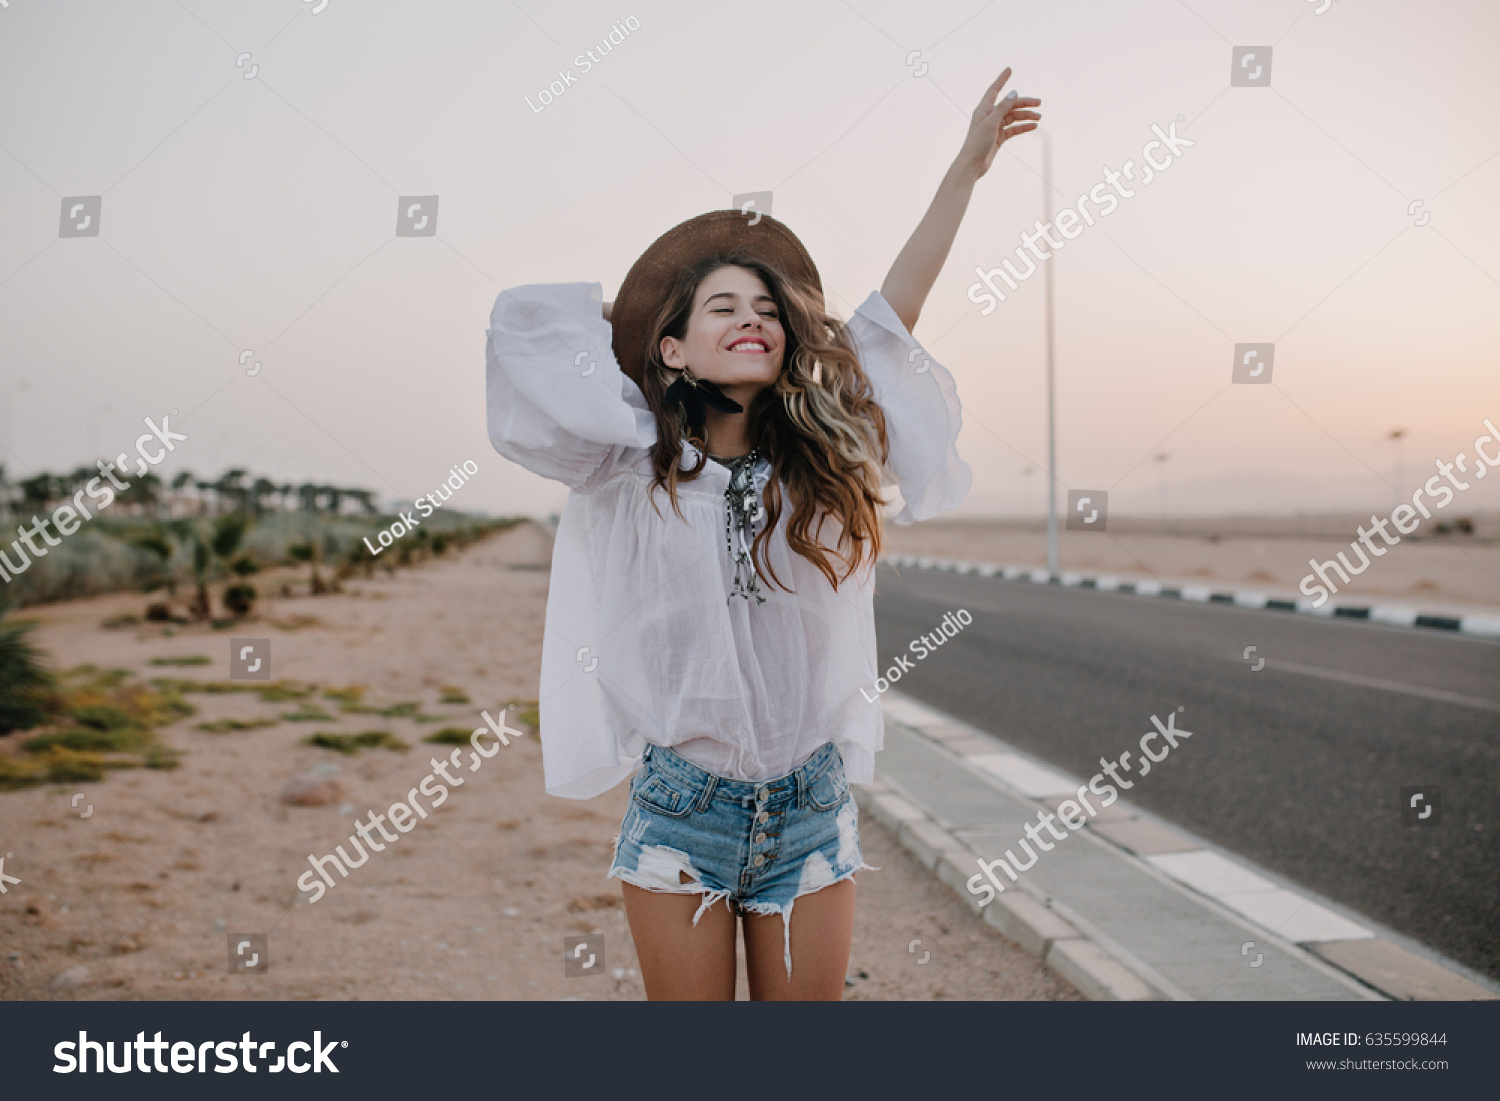 Smiling cheerful long-haired girl with curly hair breathes a full breast and enjoys freedom, standing next to road. Portrait of adorable young woman in white blouse and denim shorts having fun outside #635599844